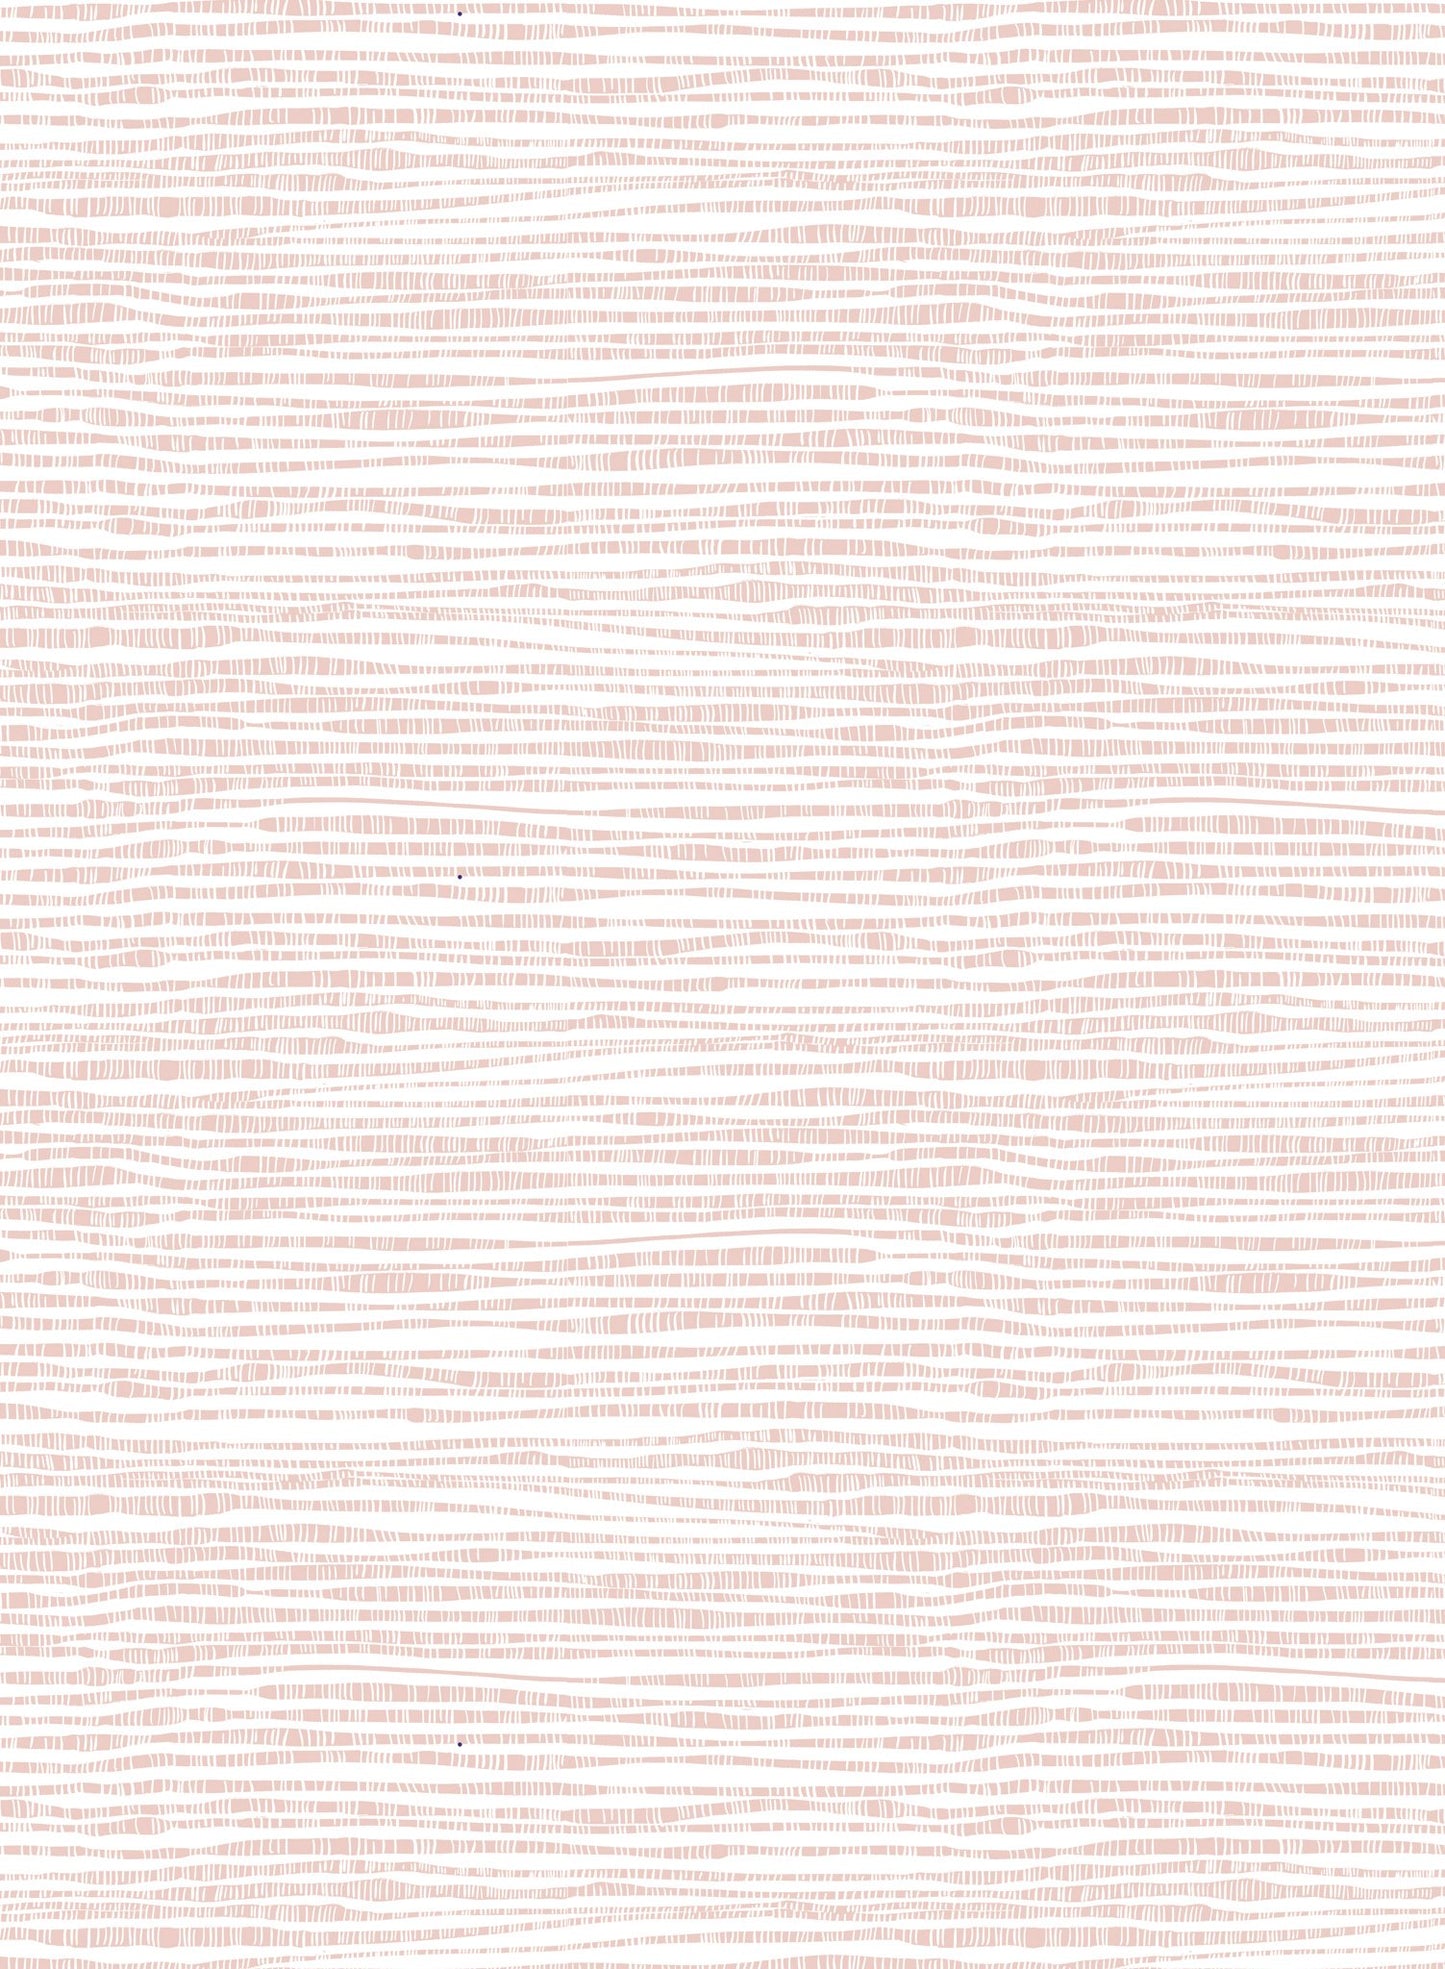 Catalogne is a minimalist wallpaper by Opposite Wall of a collection of very thin striped waves.